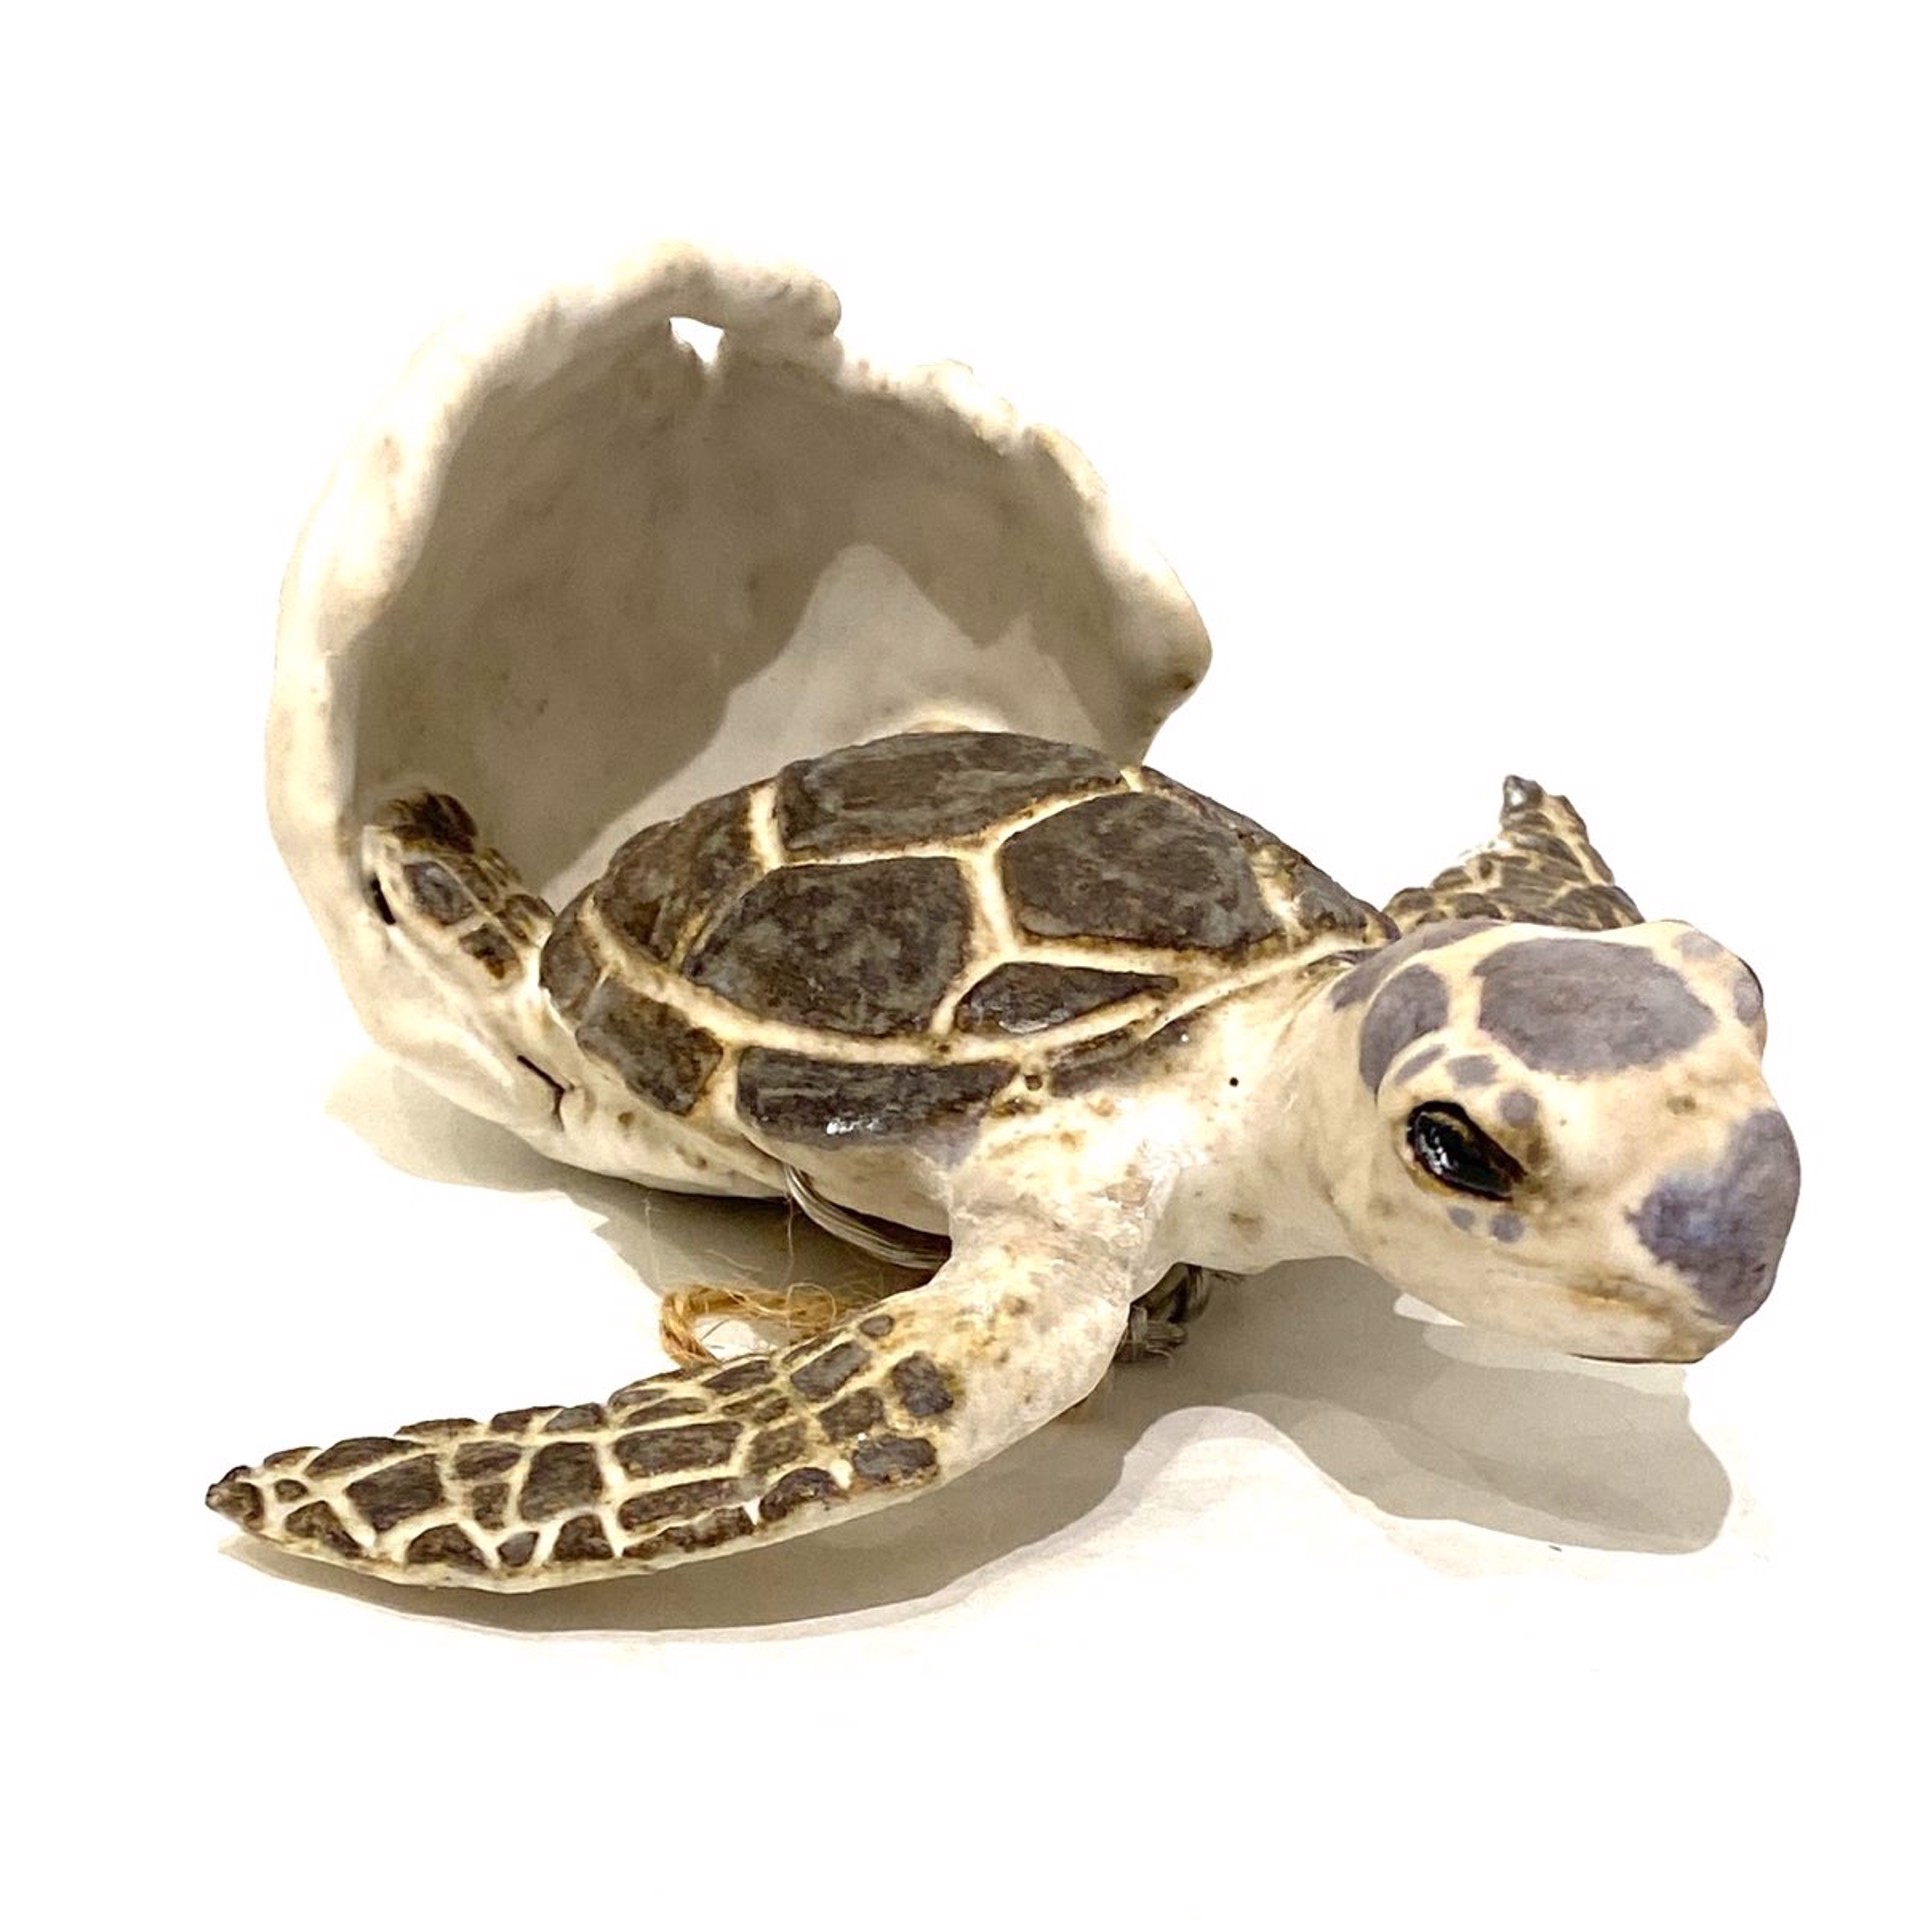 Atlantic Green Turtle Hatchling with Shell by Shayne Greco